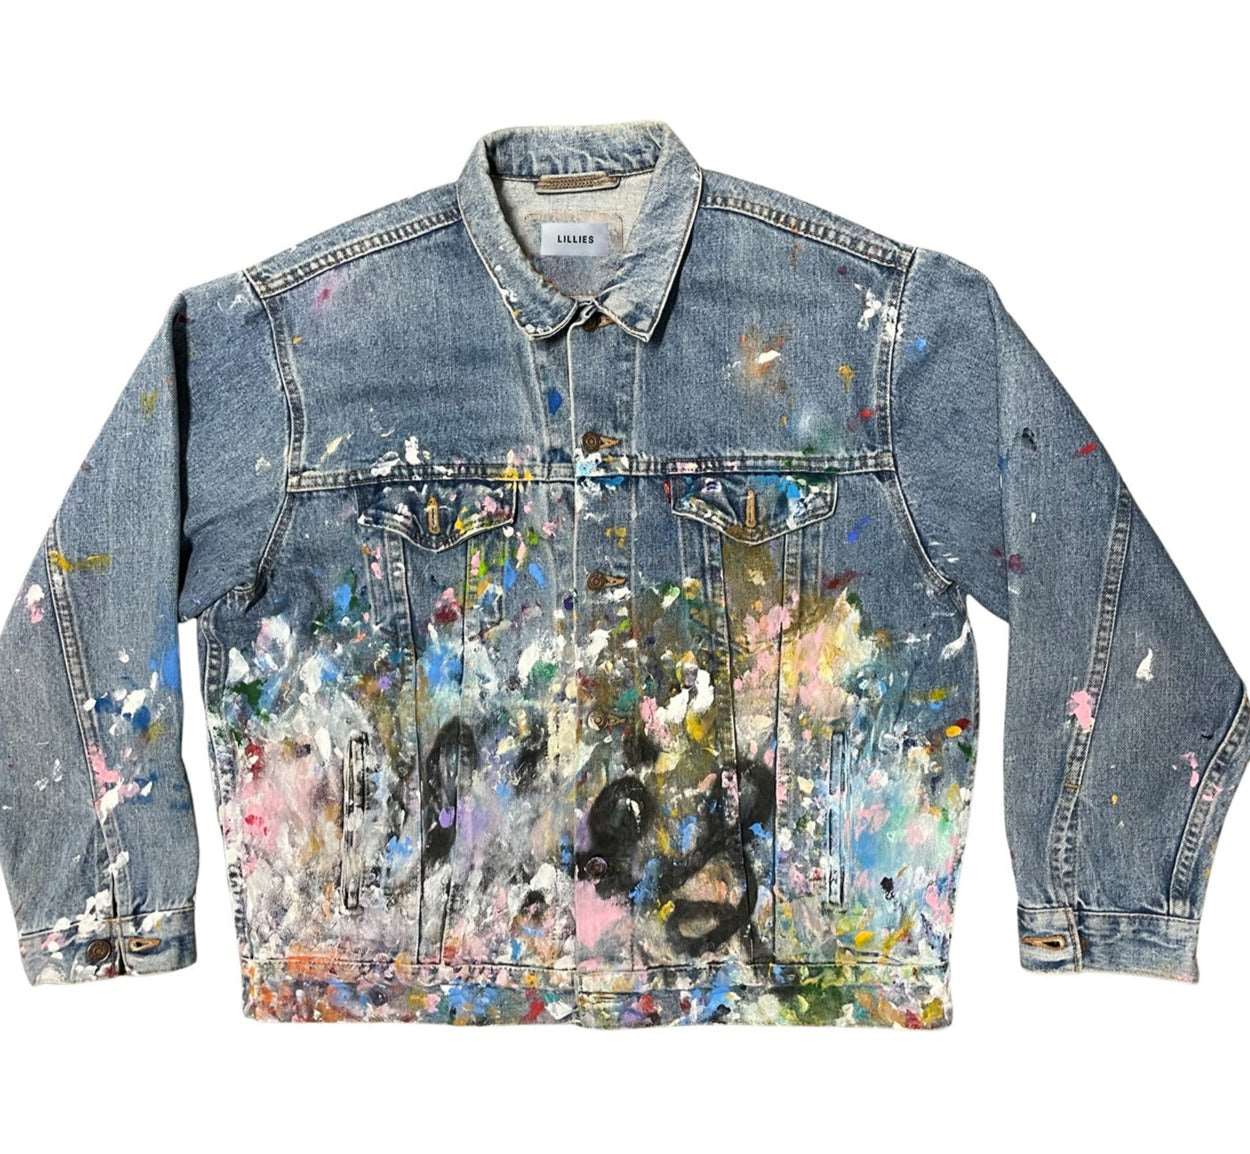 The rainbow jacket is a vintage trucker jacket with hand-painted details